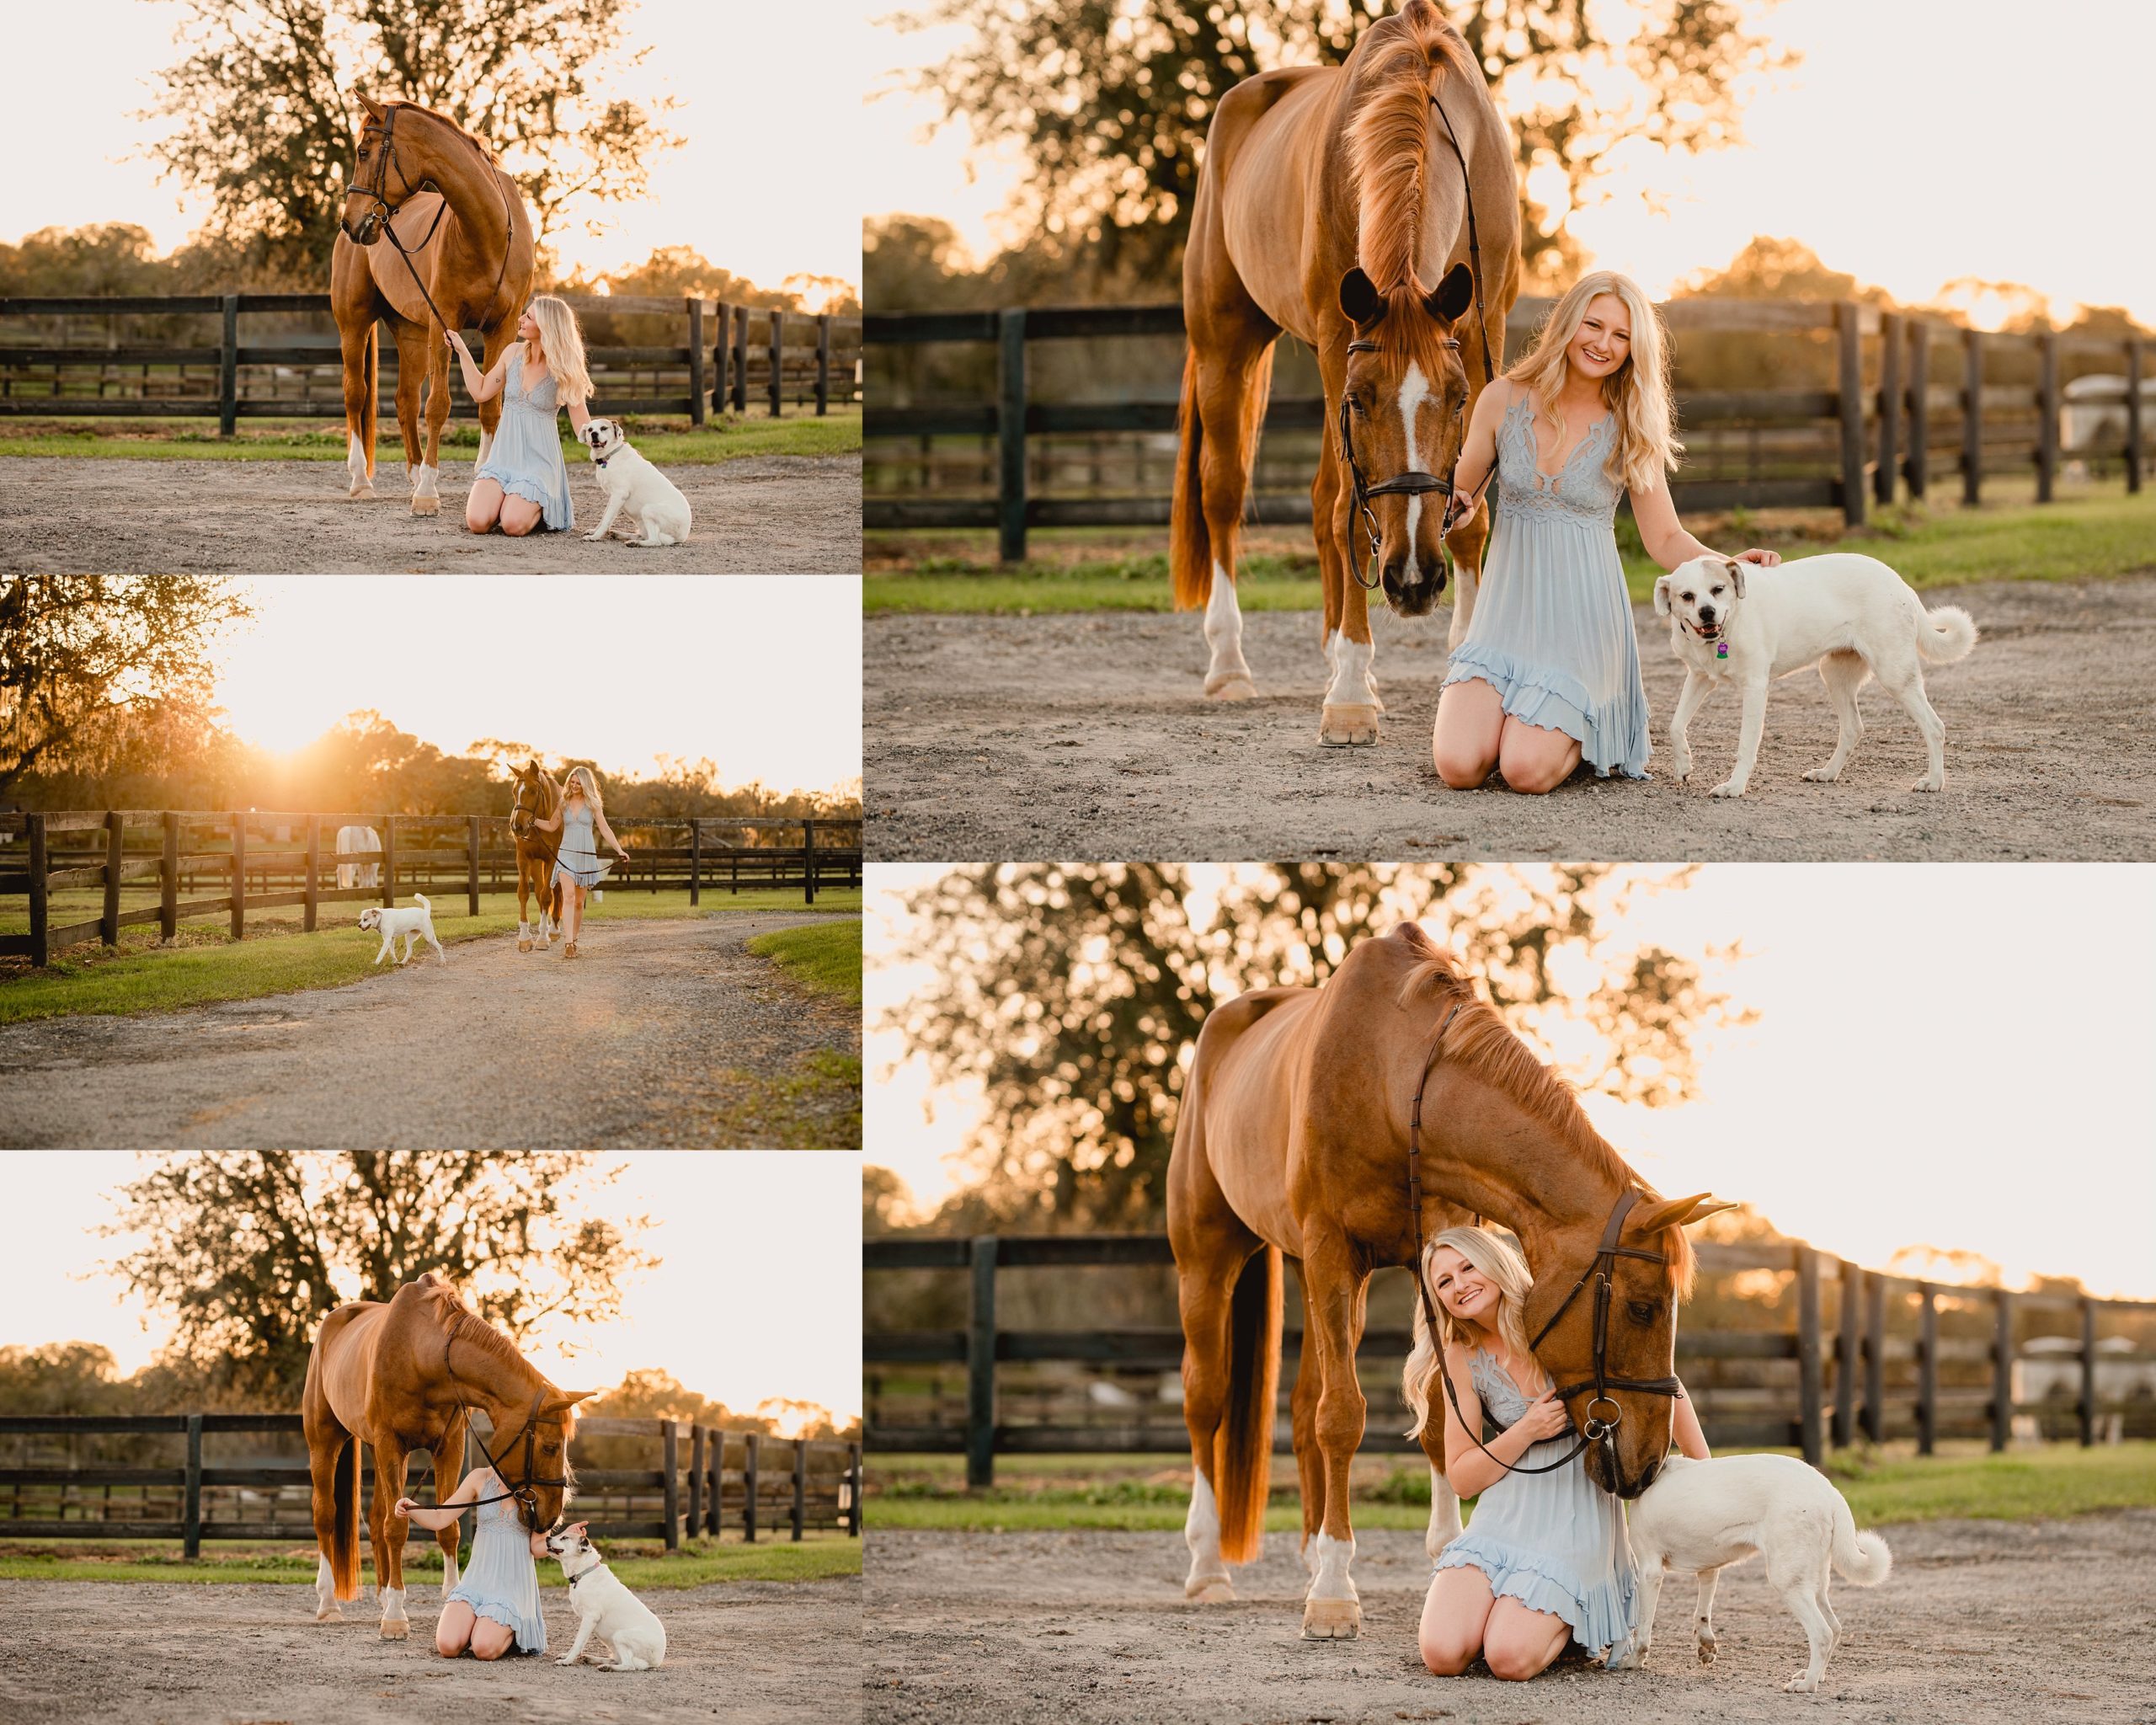 Girl with her horse and dog photographed at sunset in Florida by equine photographer.